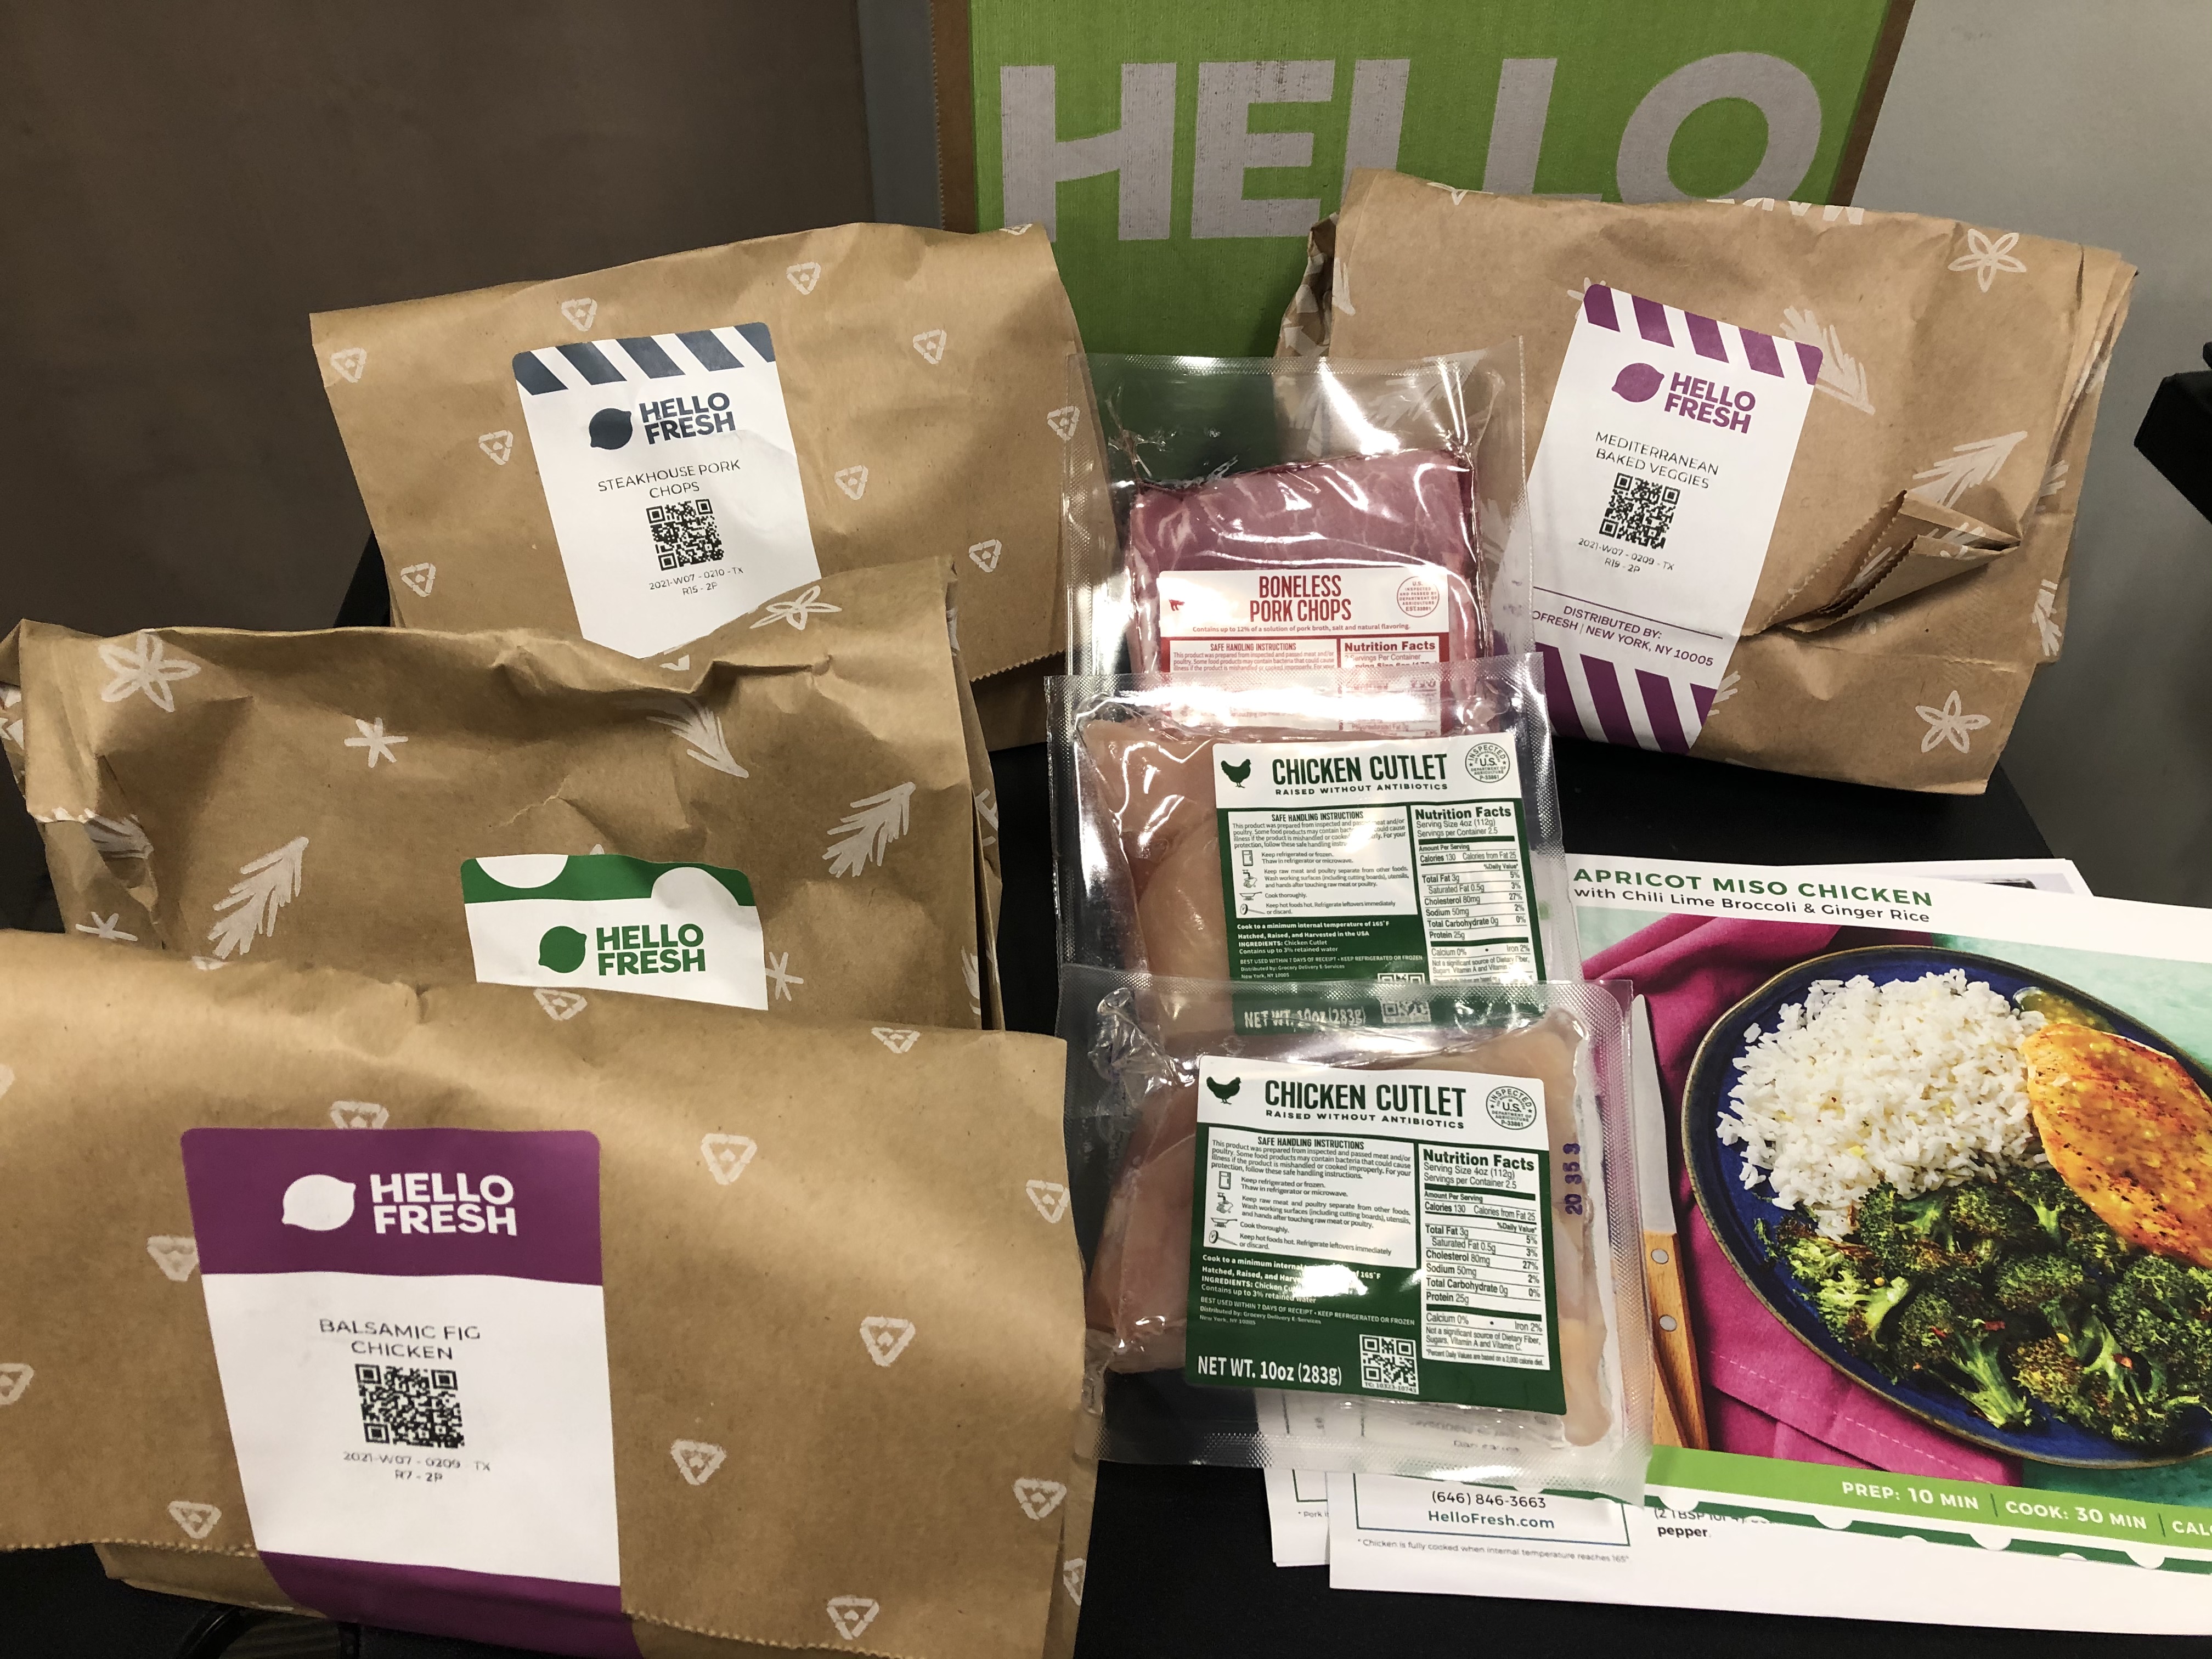 Each HelloFresh meal kit contains all the necessary fresh ingredients for families to prepare meals at home. Grand Husky Logistics and HelloFresh worked quickly to identify a charity that could provide meal kits to those who need it most: North Texans who are struggling with hunger.